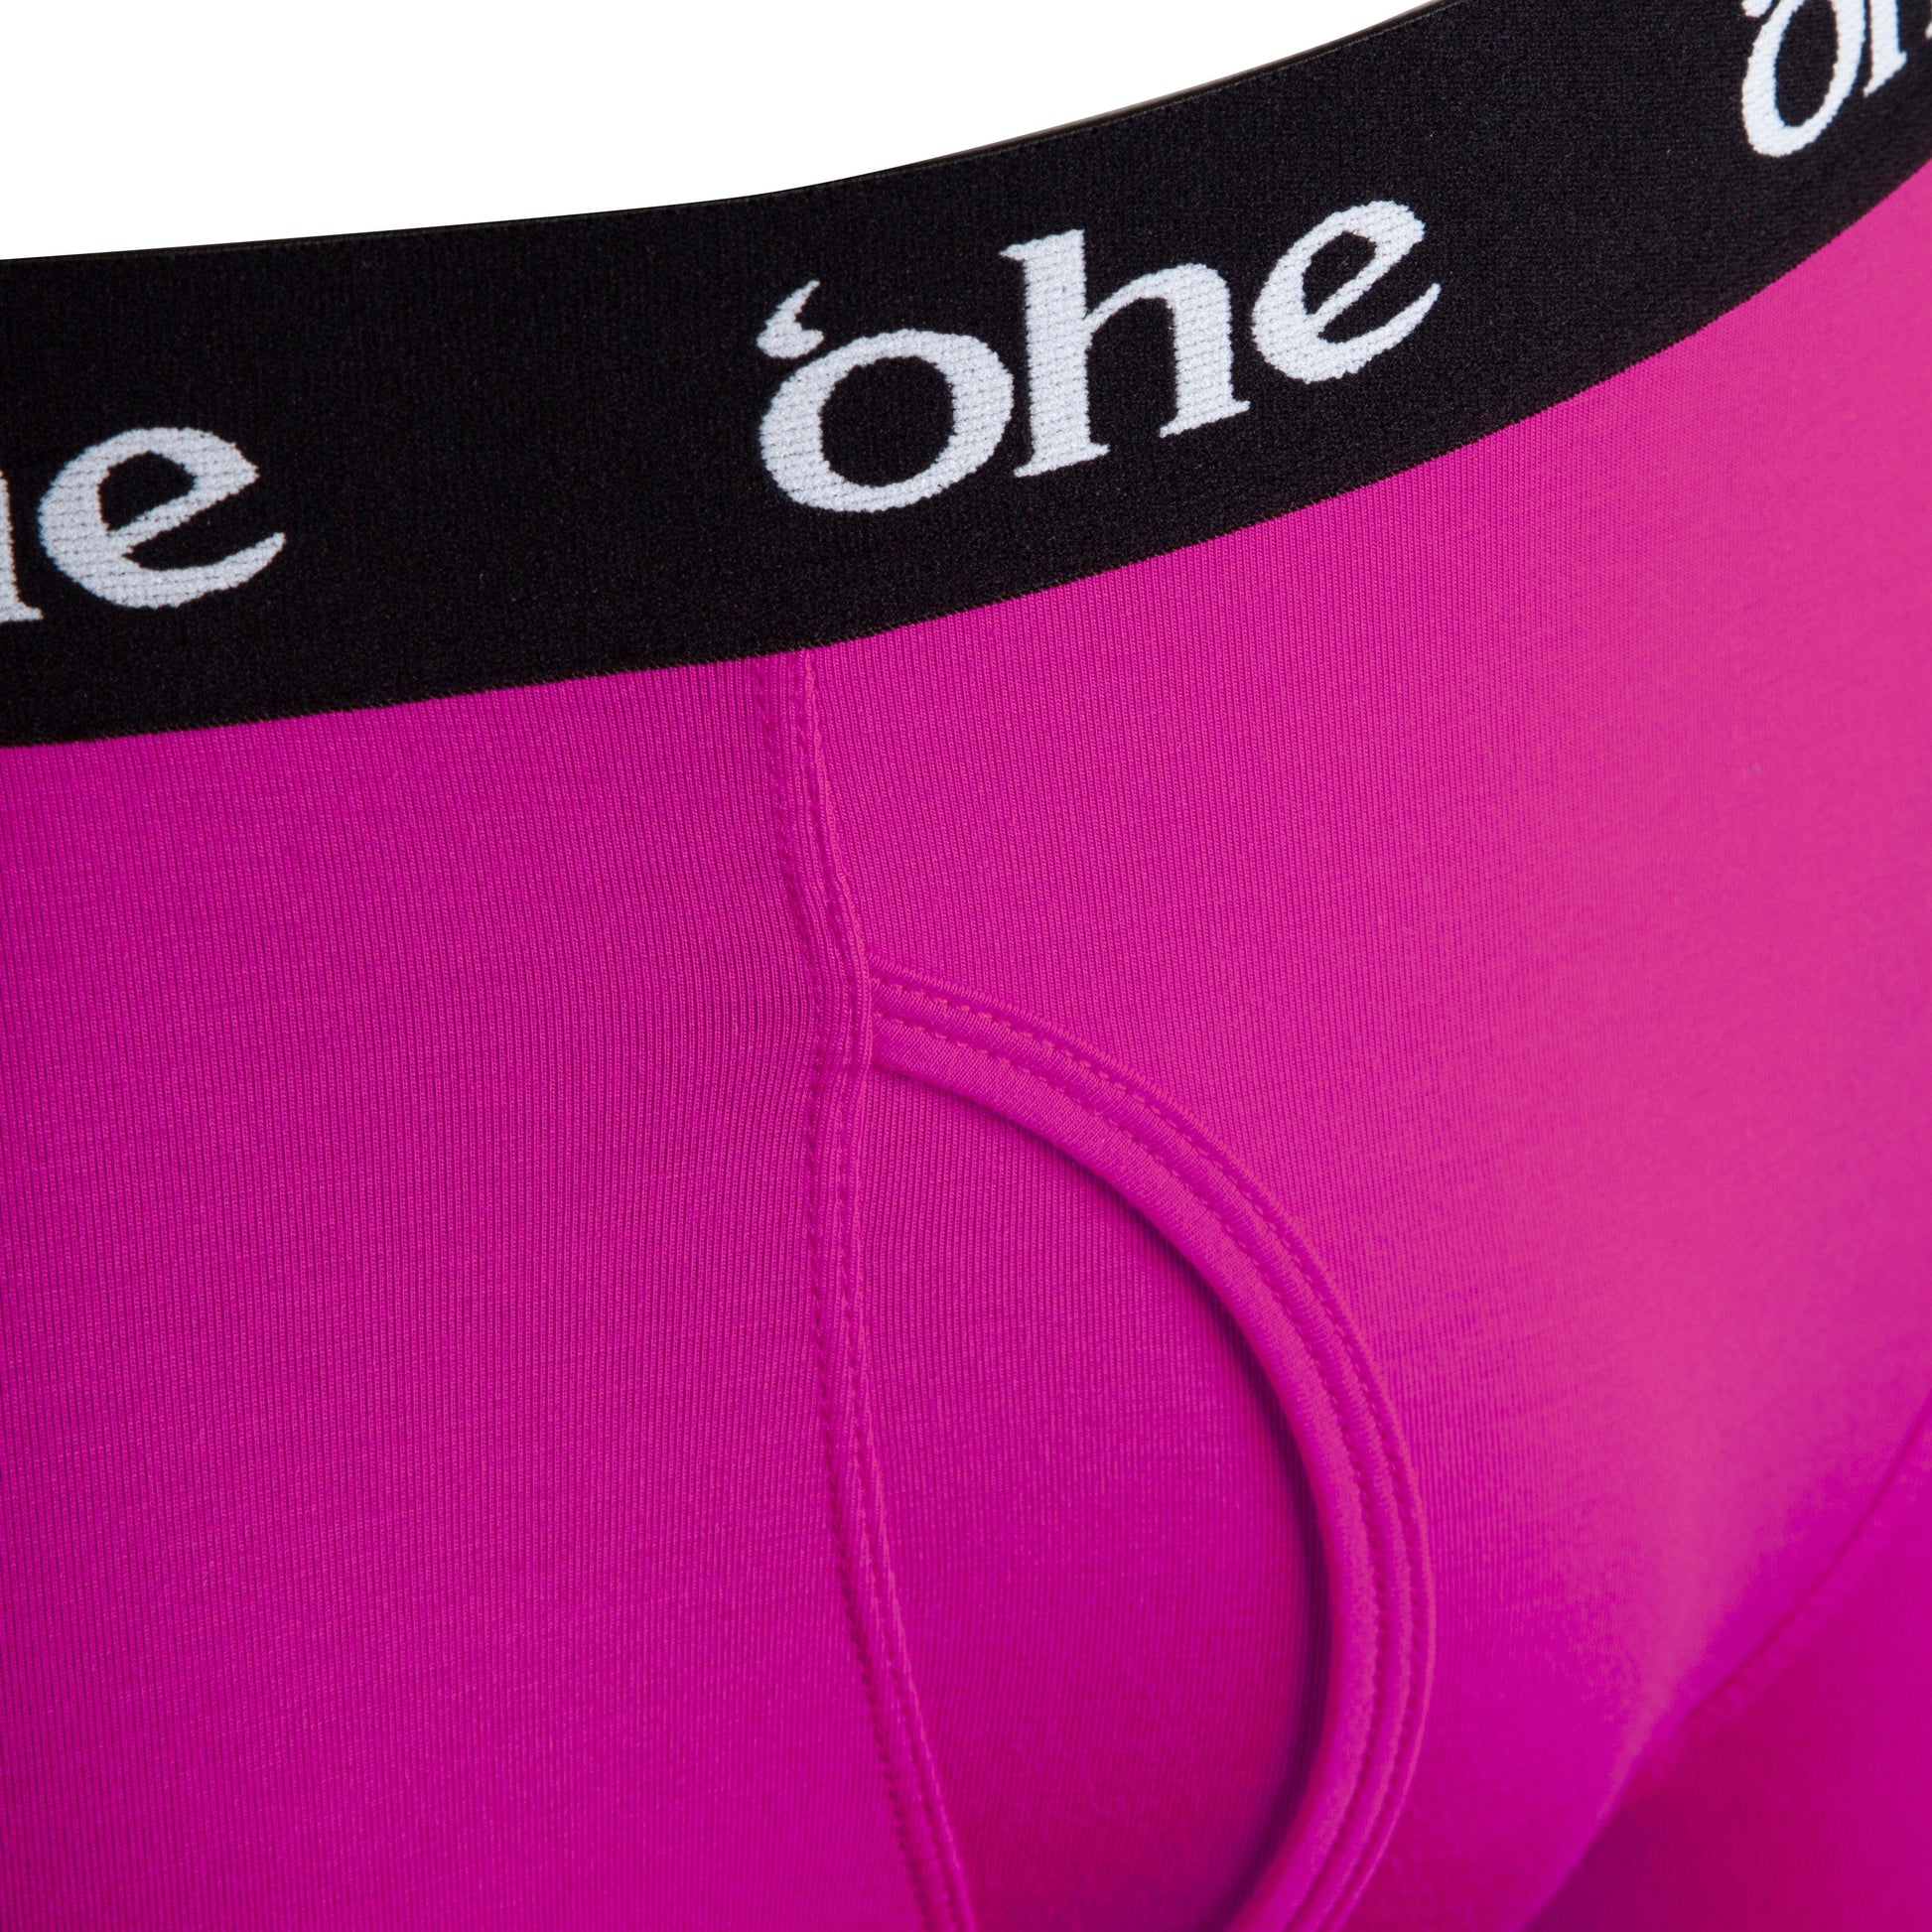 Close up view of fly and waistband on purple/magenta men's bamboo boxer shorts from 'ohe